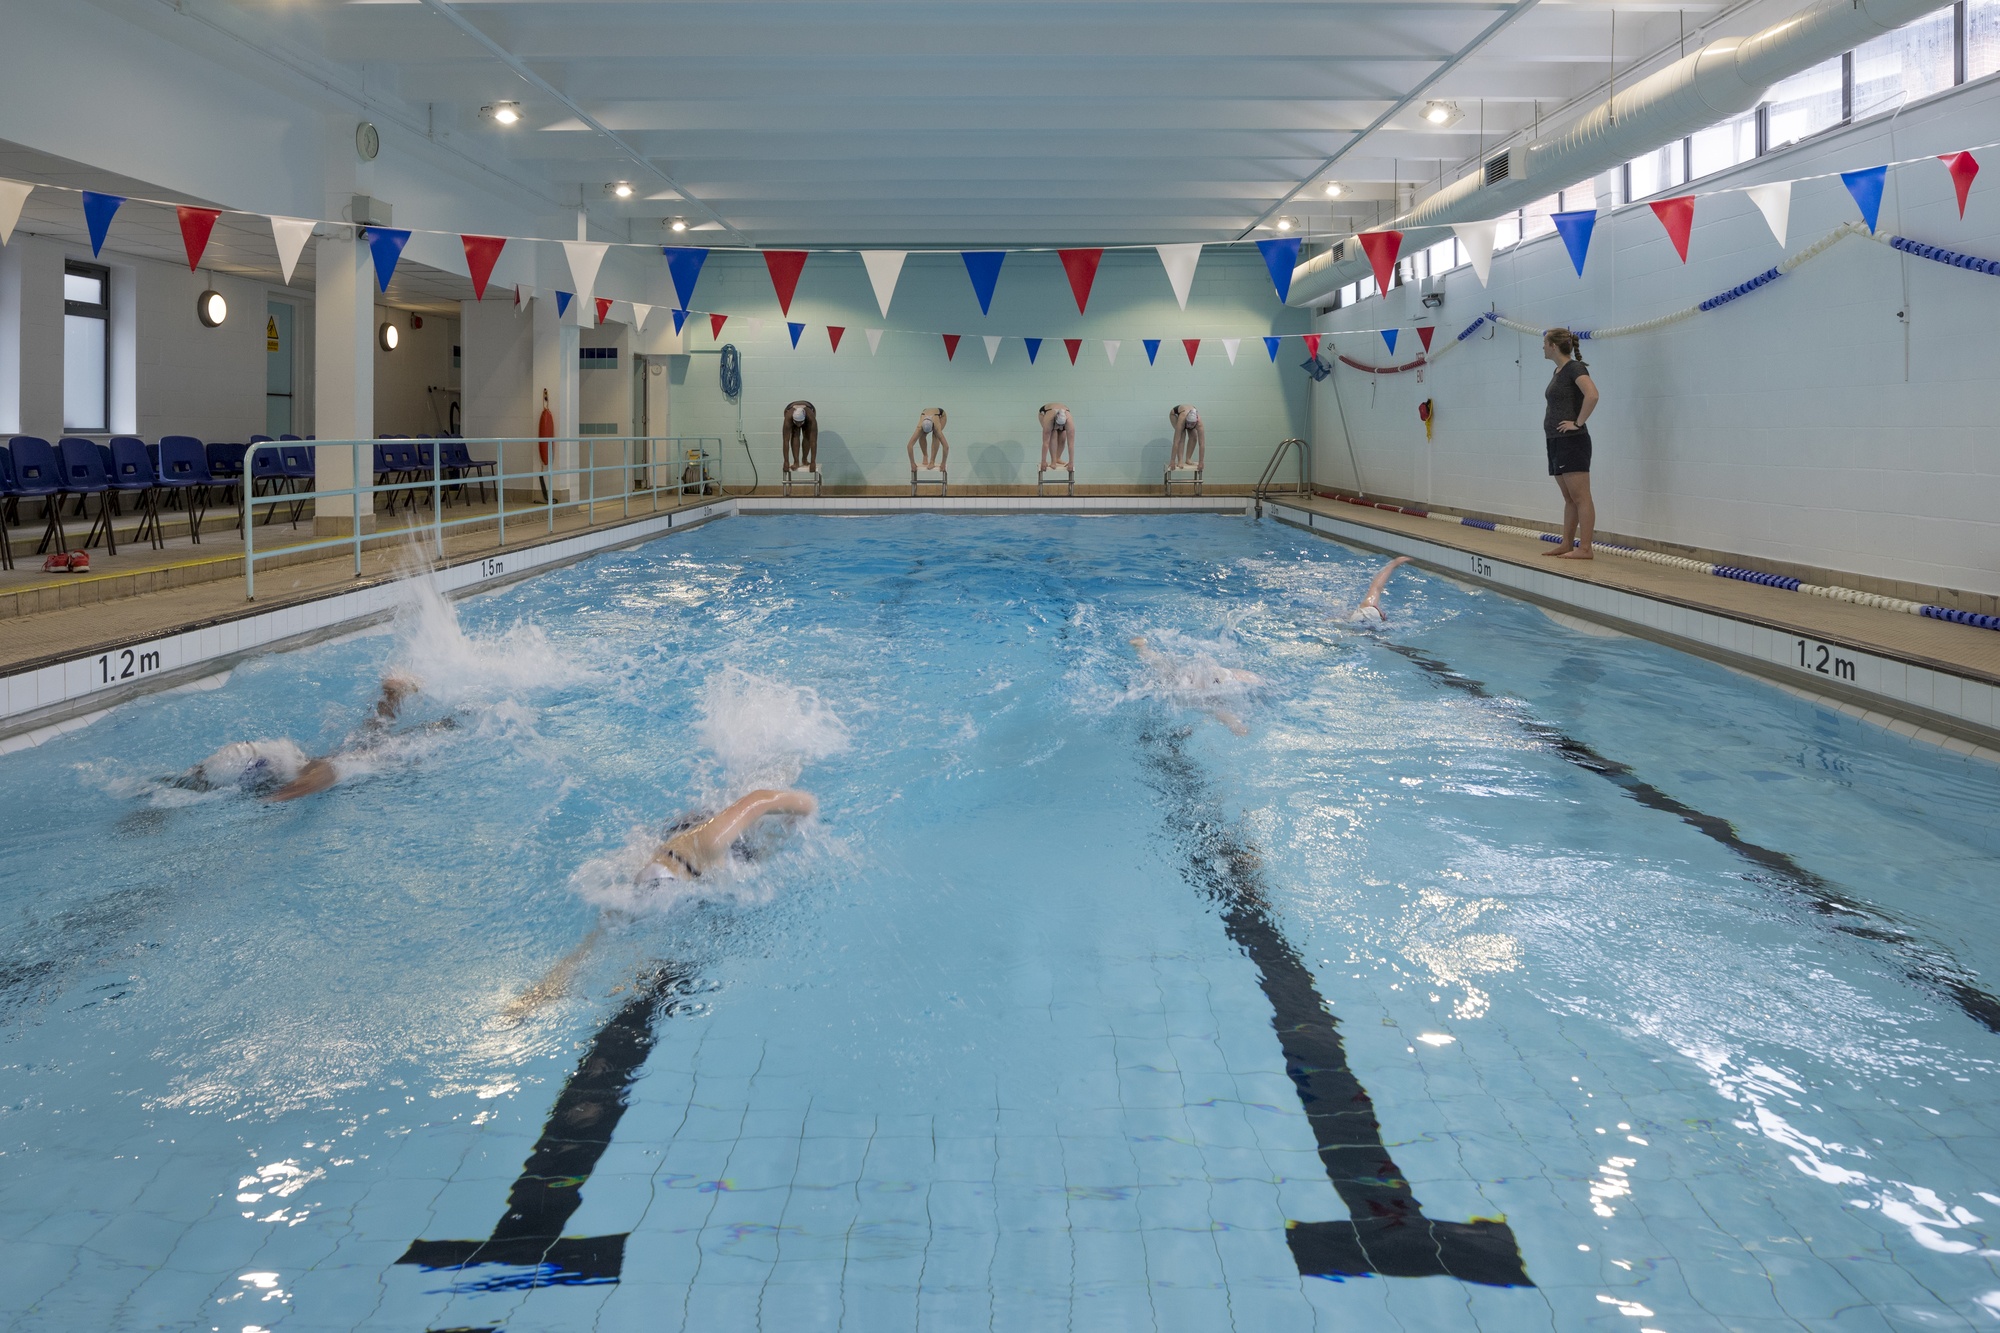 Students swimming